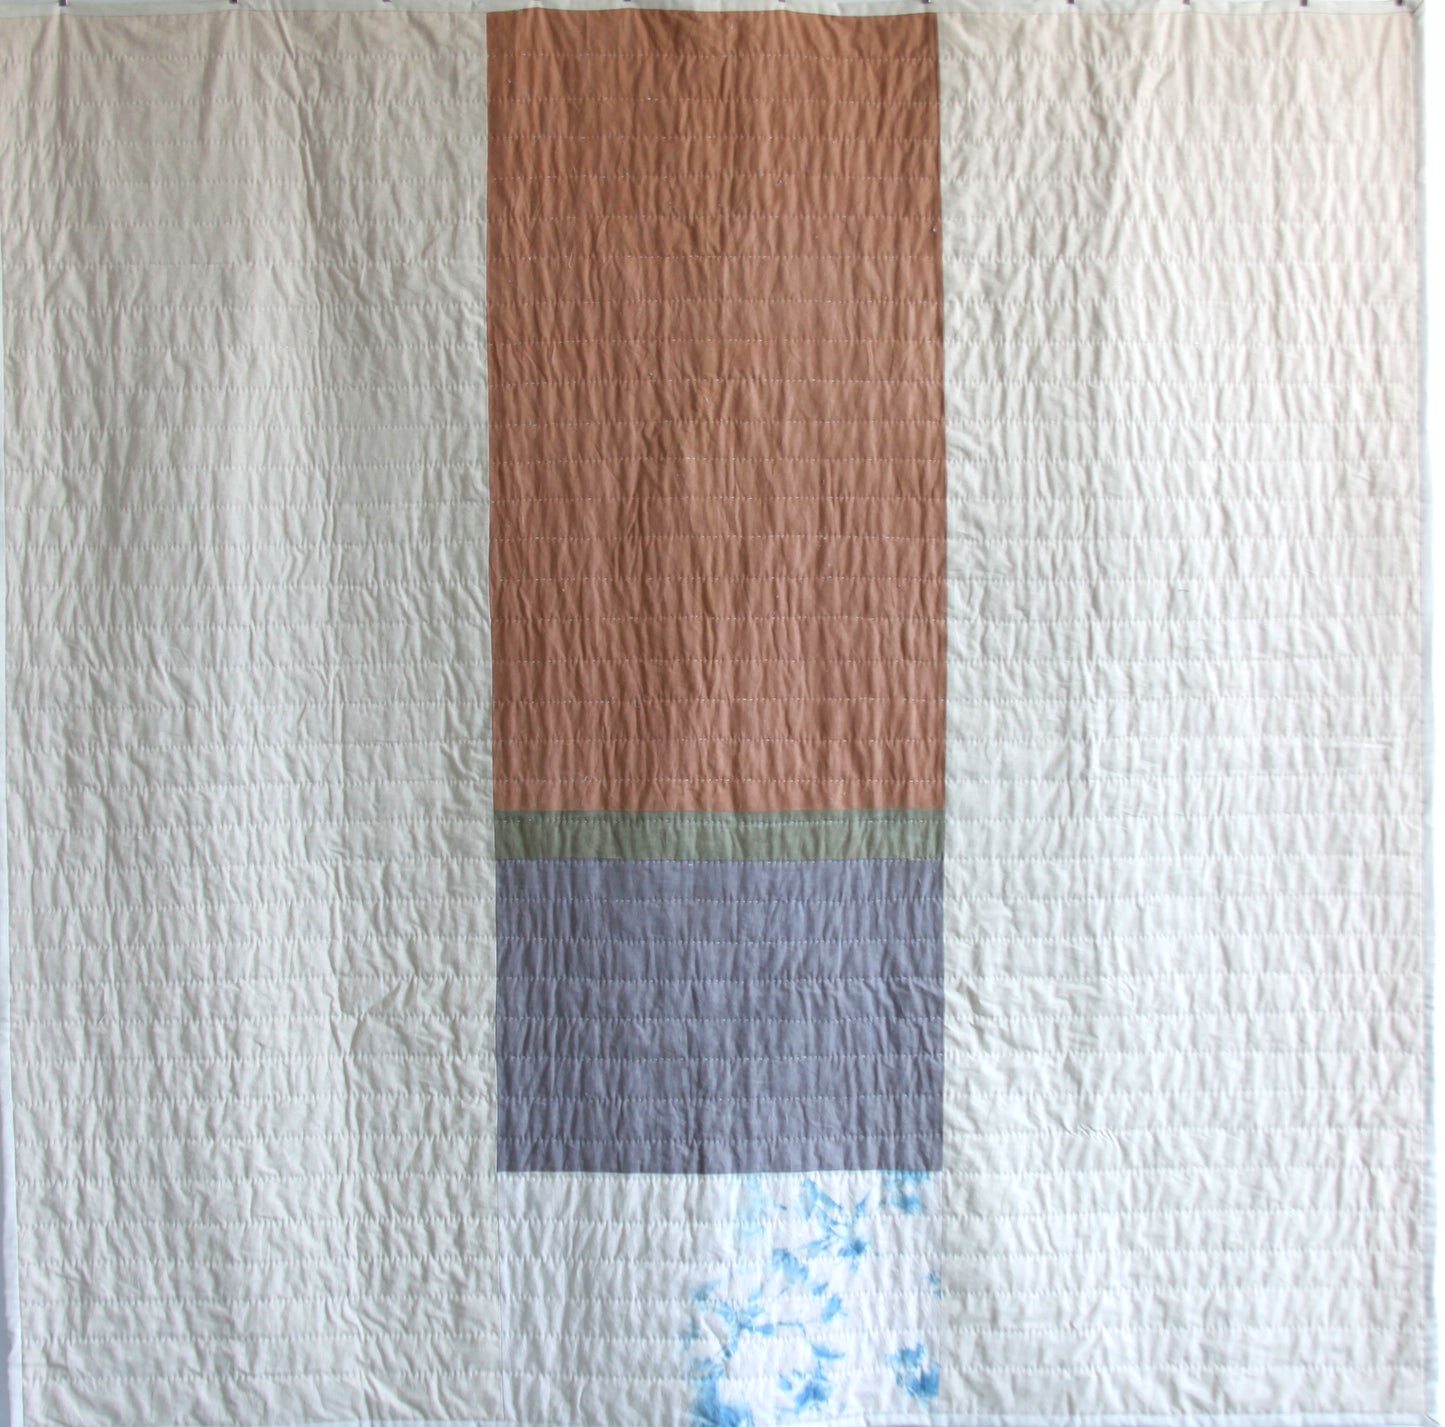 Lilacs Quilt 2 (Currently on view at VERSE Work/Shop)